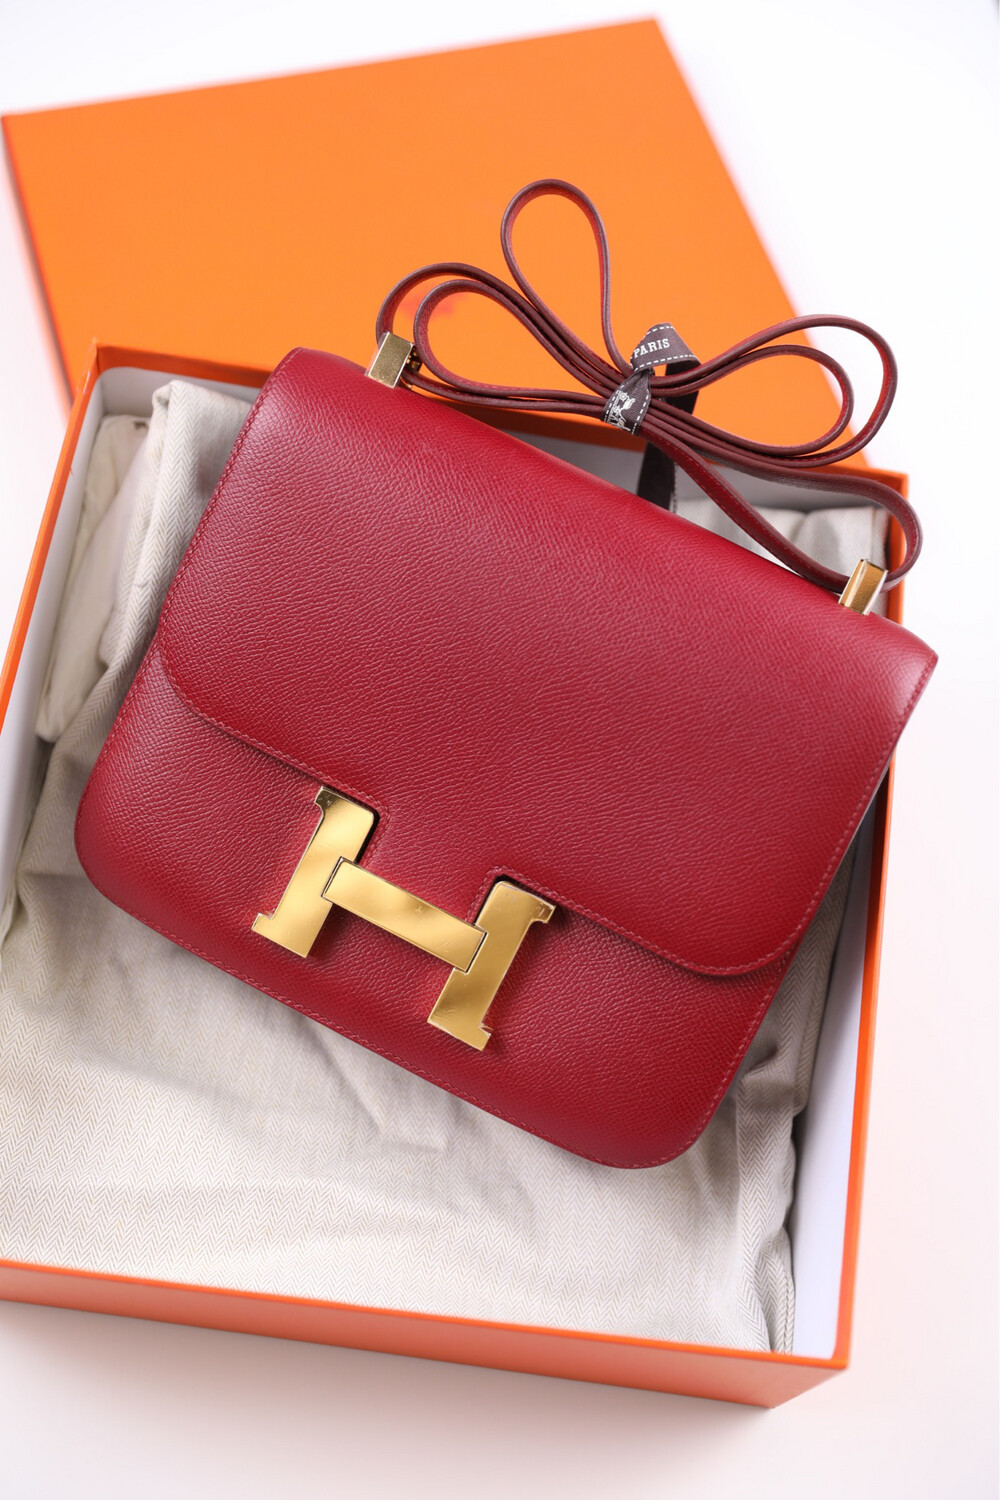 Hermes Constance 24, Rubis Red Espsom with Gold Hardware, Preowned in Box  WA001